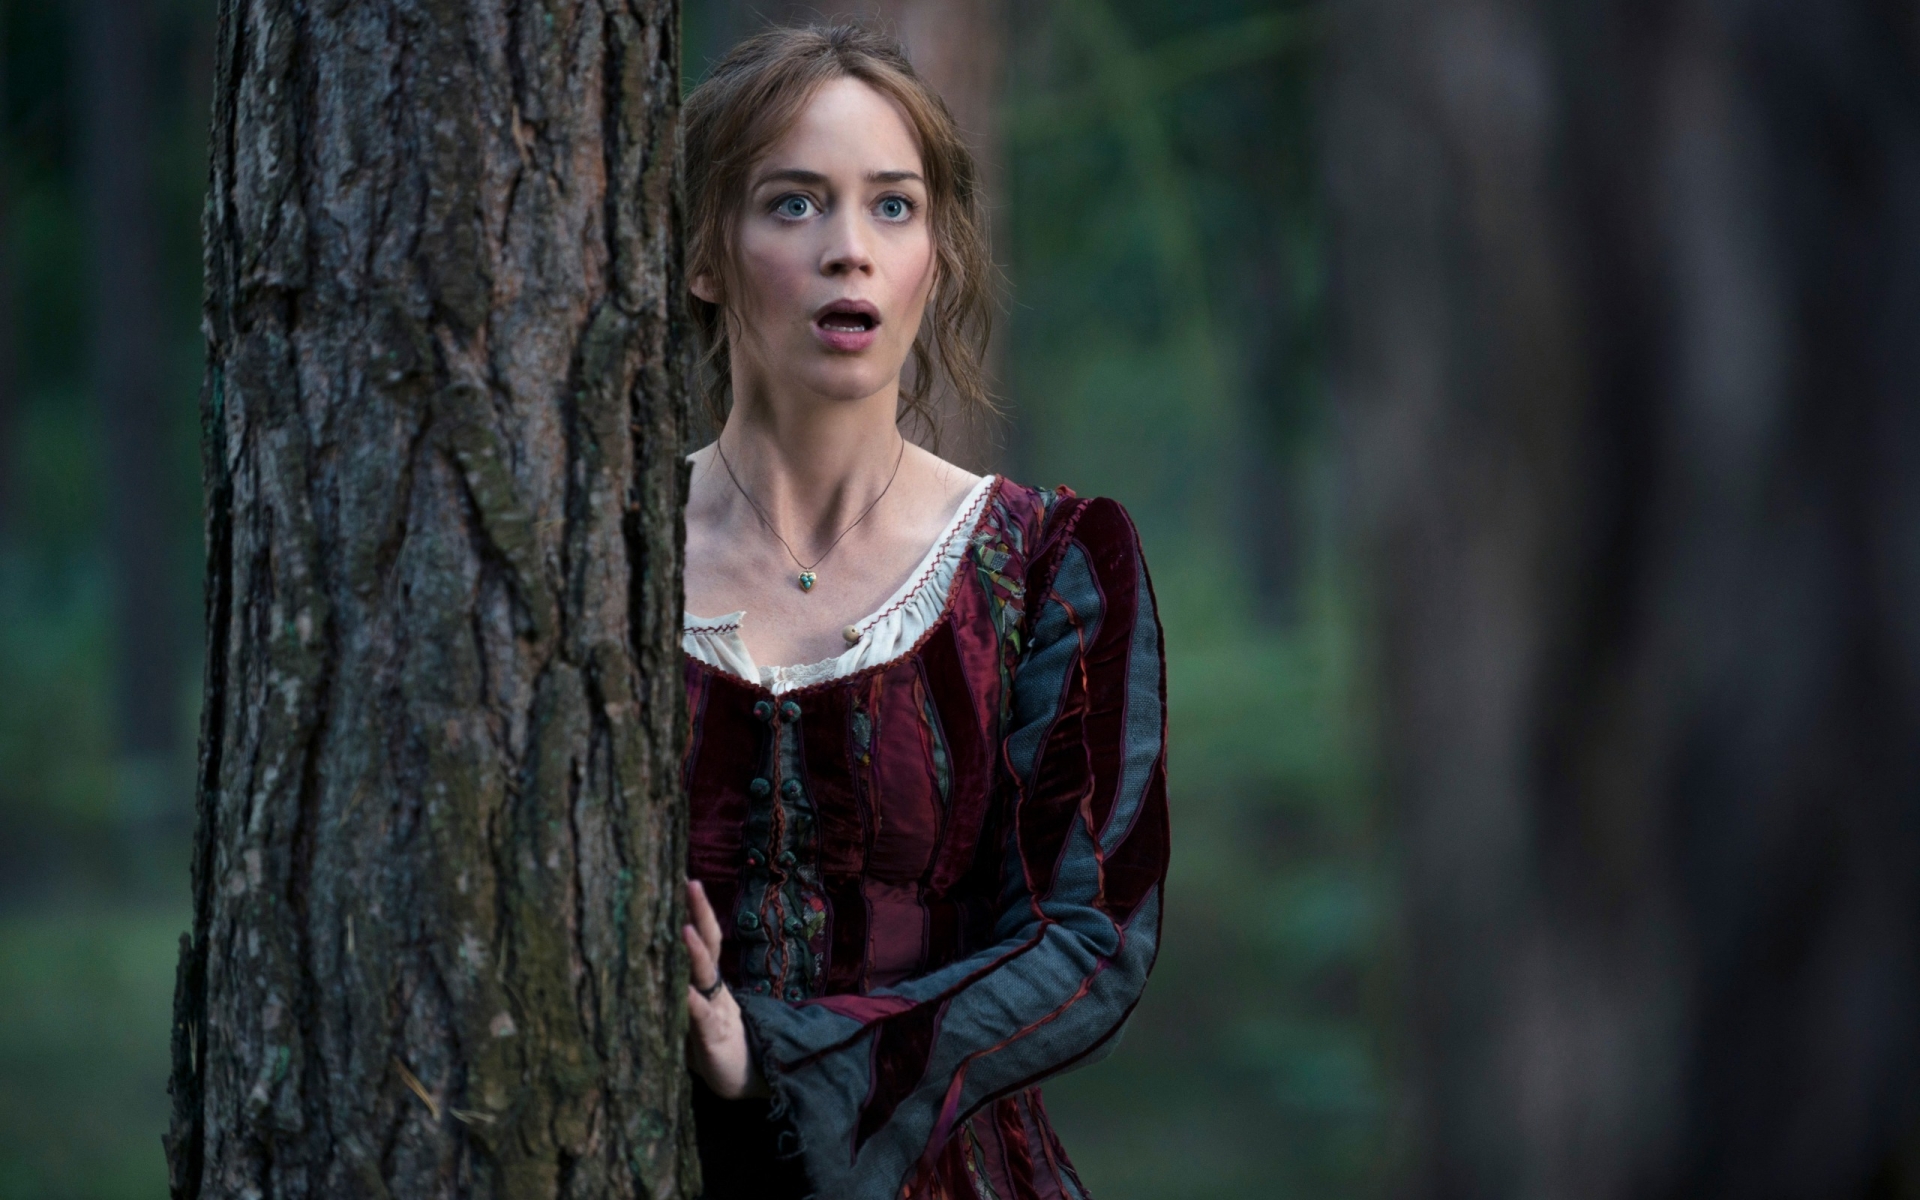 Into the Woods Emily Blunt for 1920 x 1200 widescreen resolution